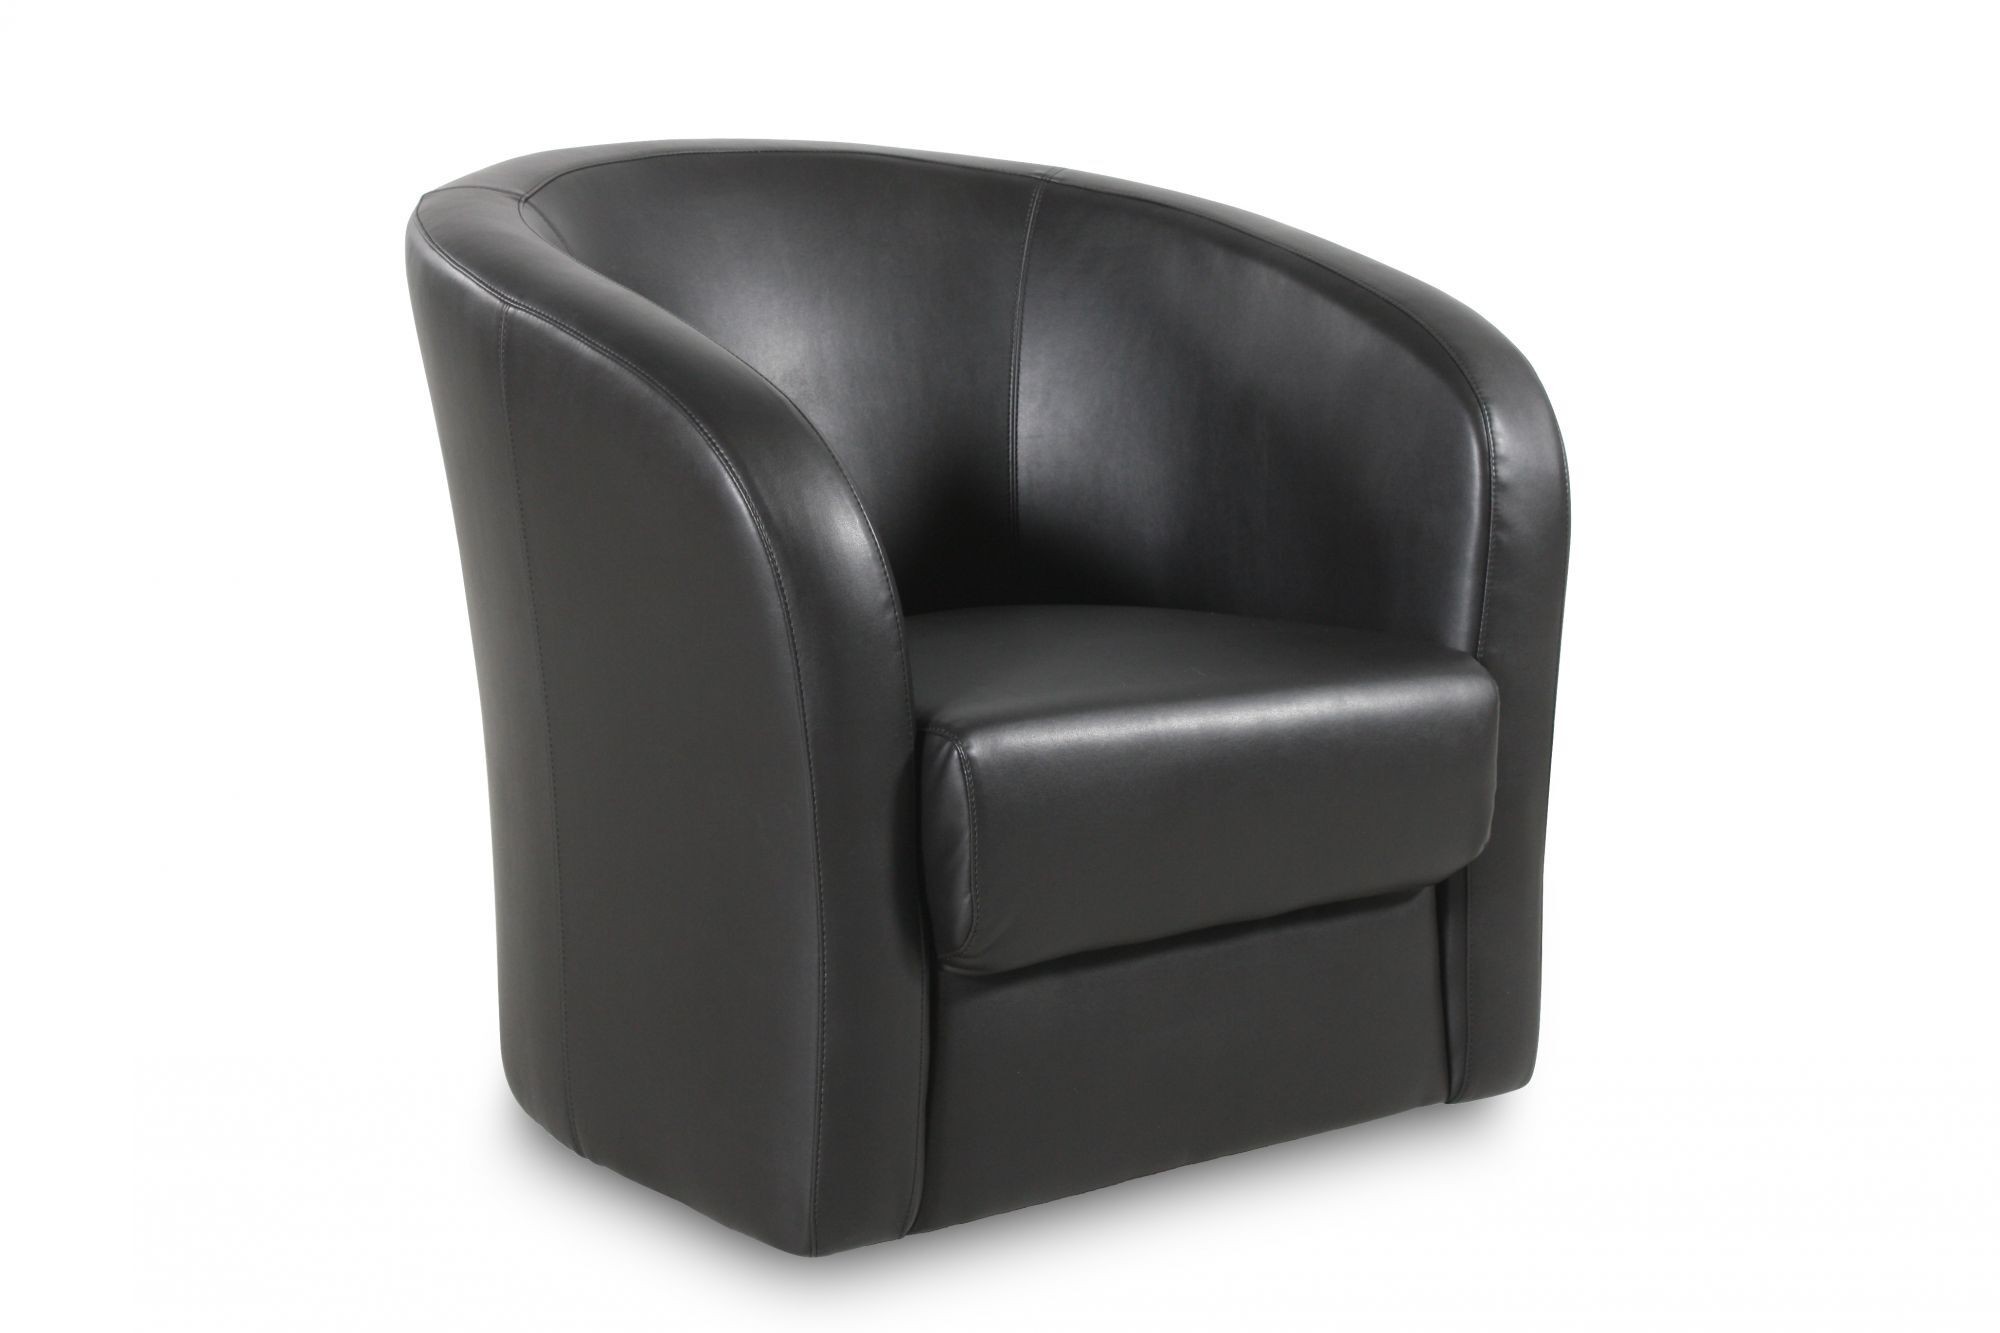 Low back swivel chair in onyx mathis brothers furniture